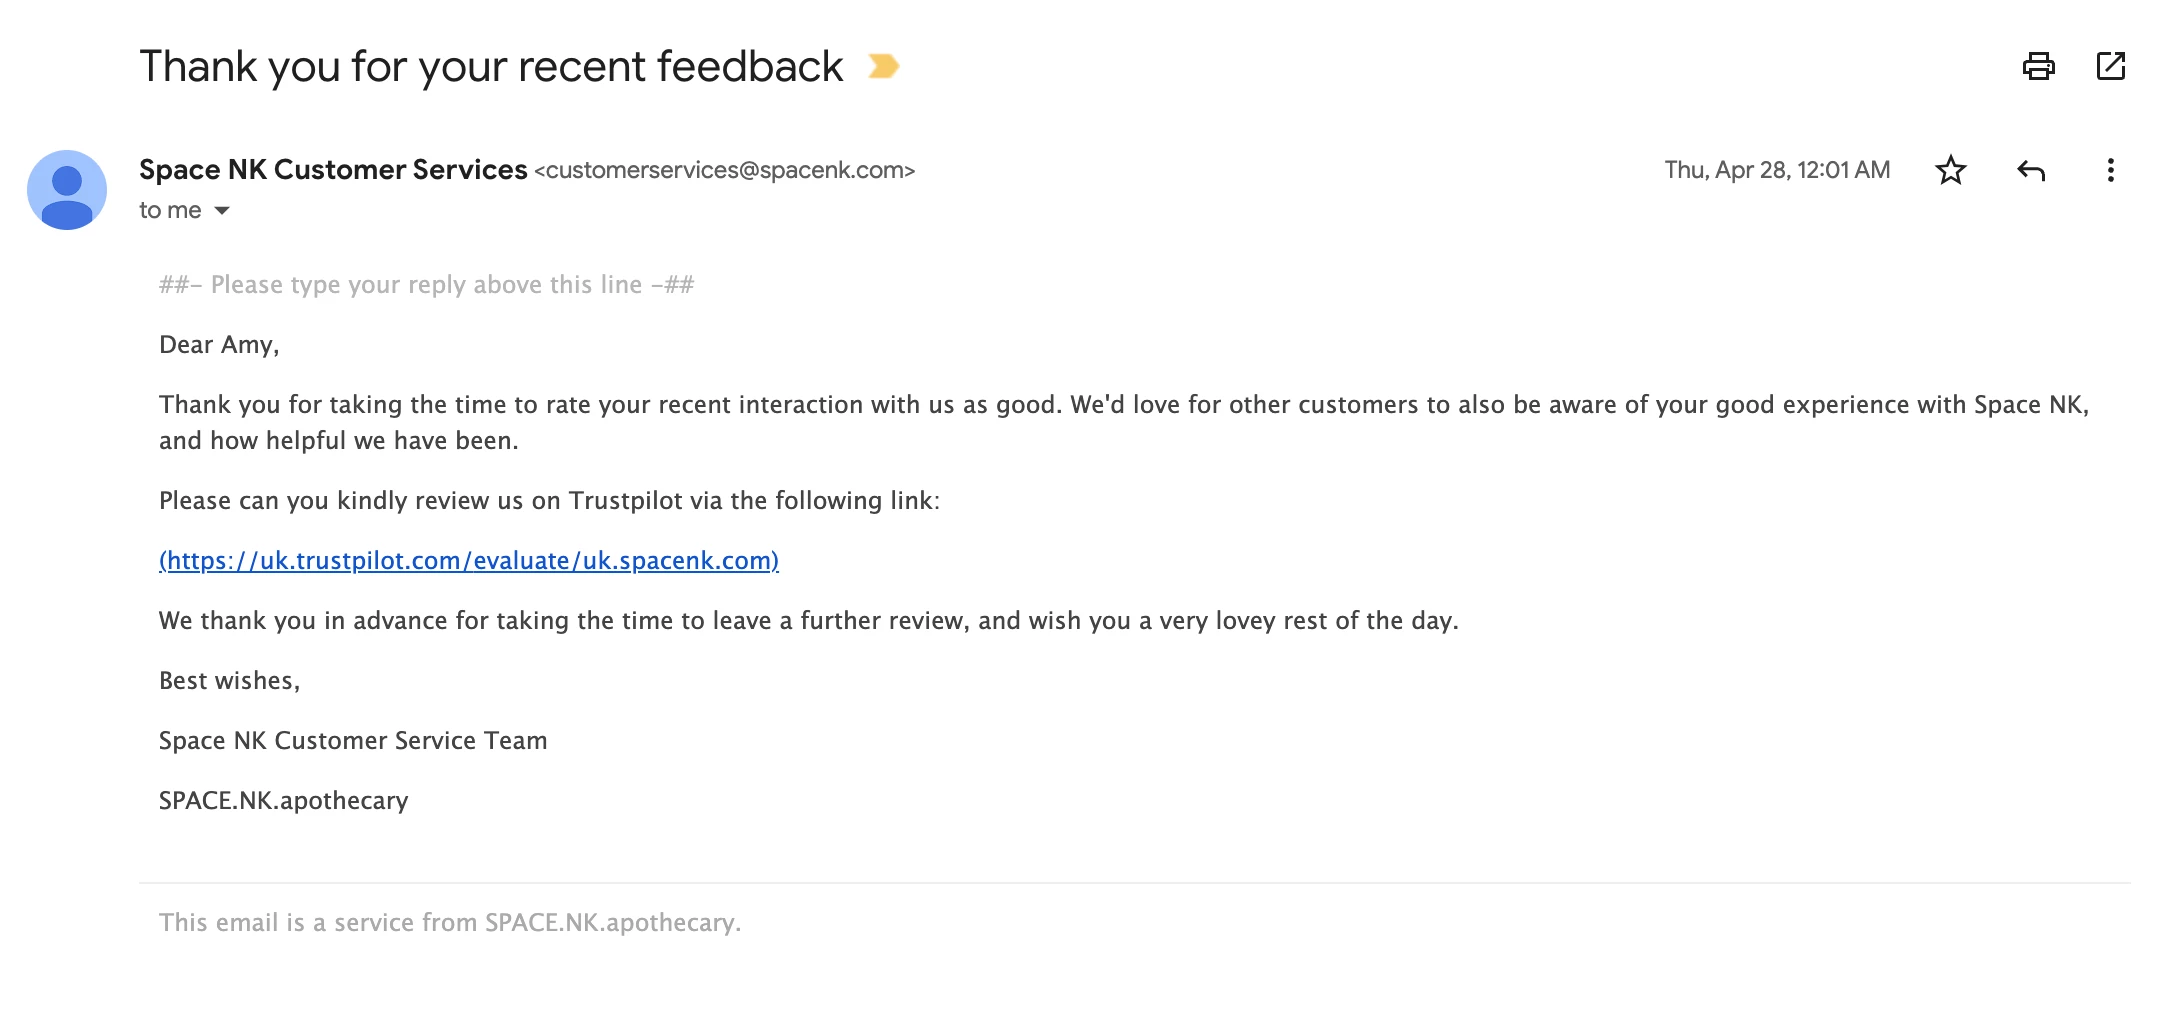 Example of a feedback thank you email from SpaceNK.